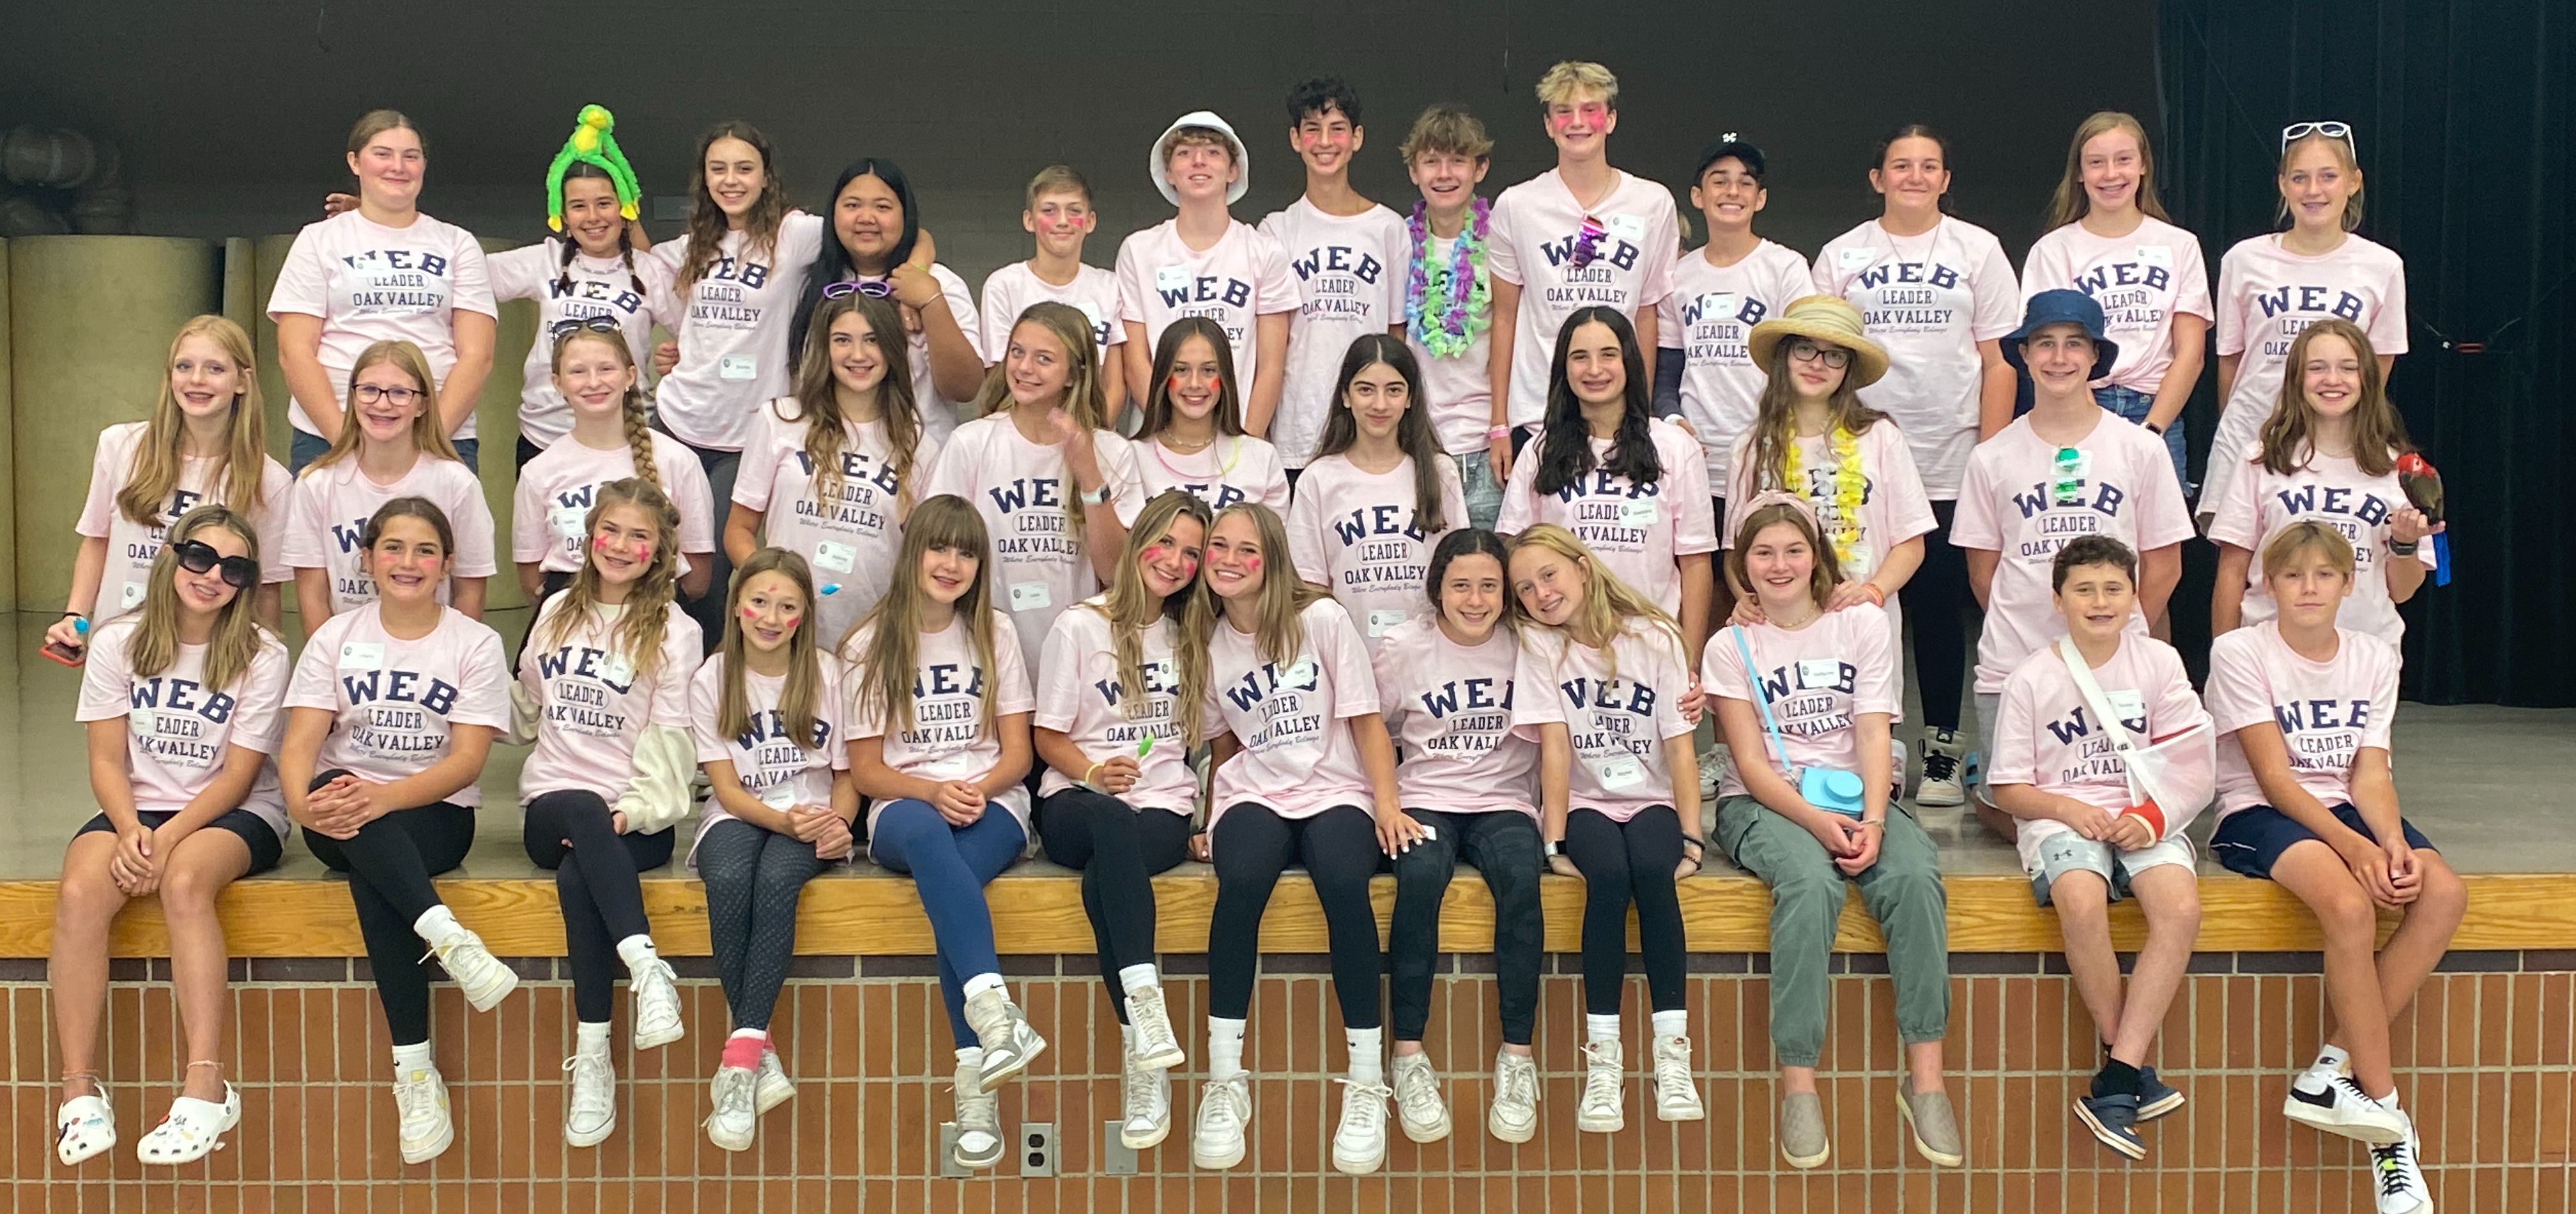 WEB leaders in group photo wearing pink t-shirts